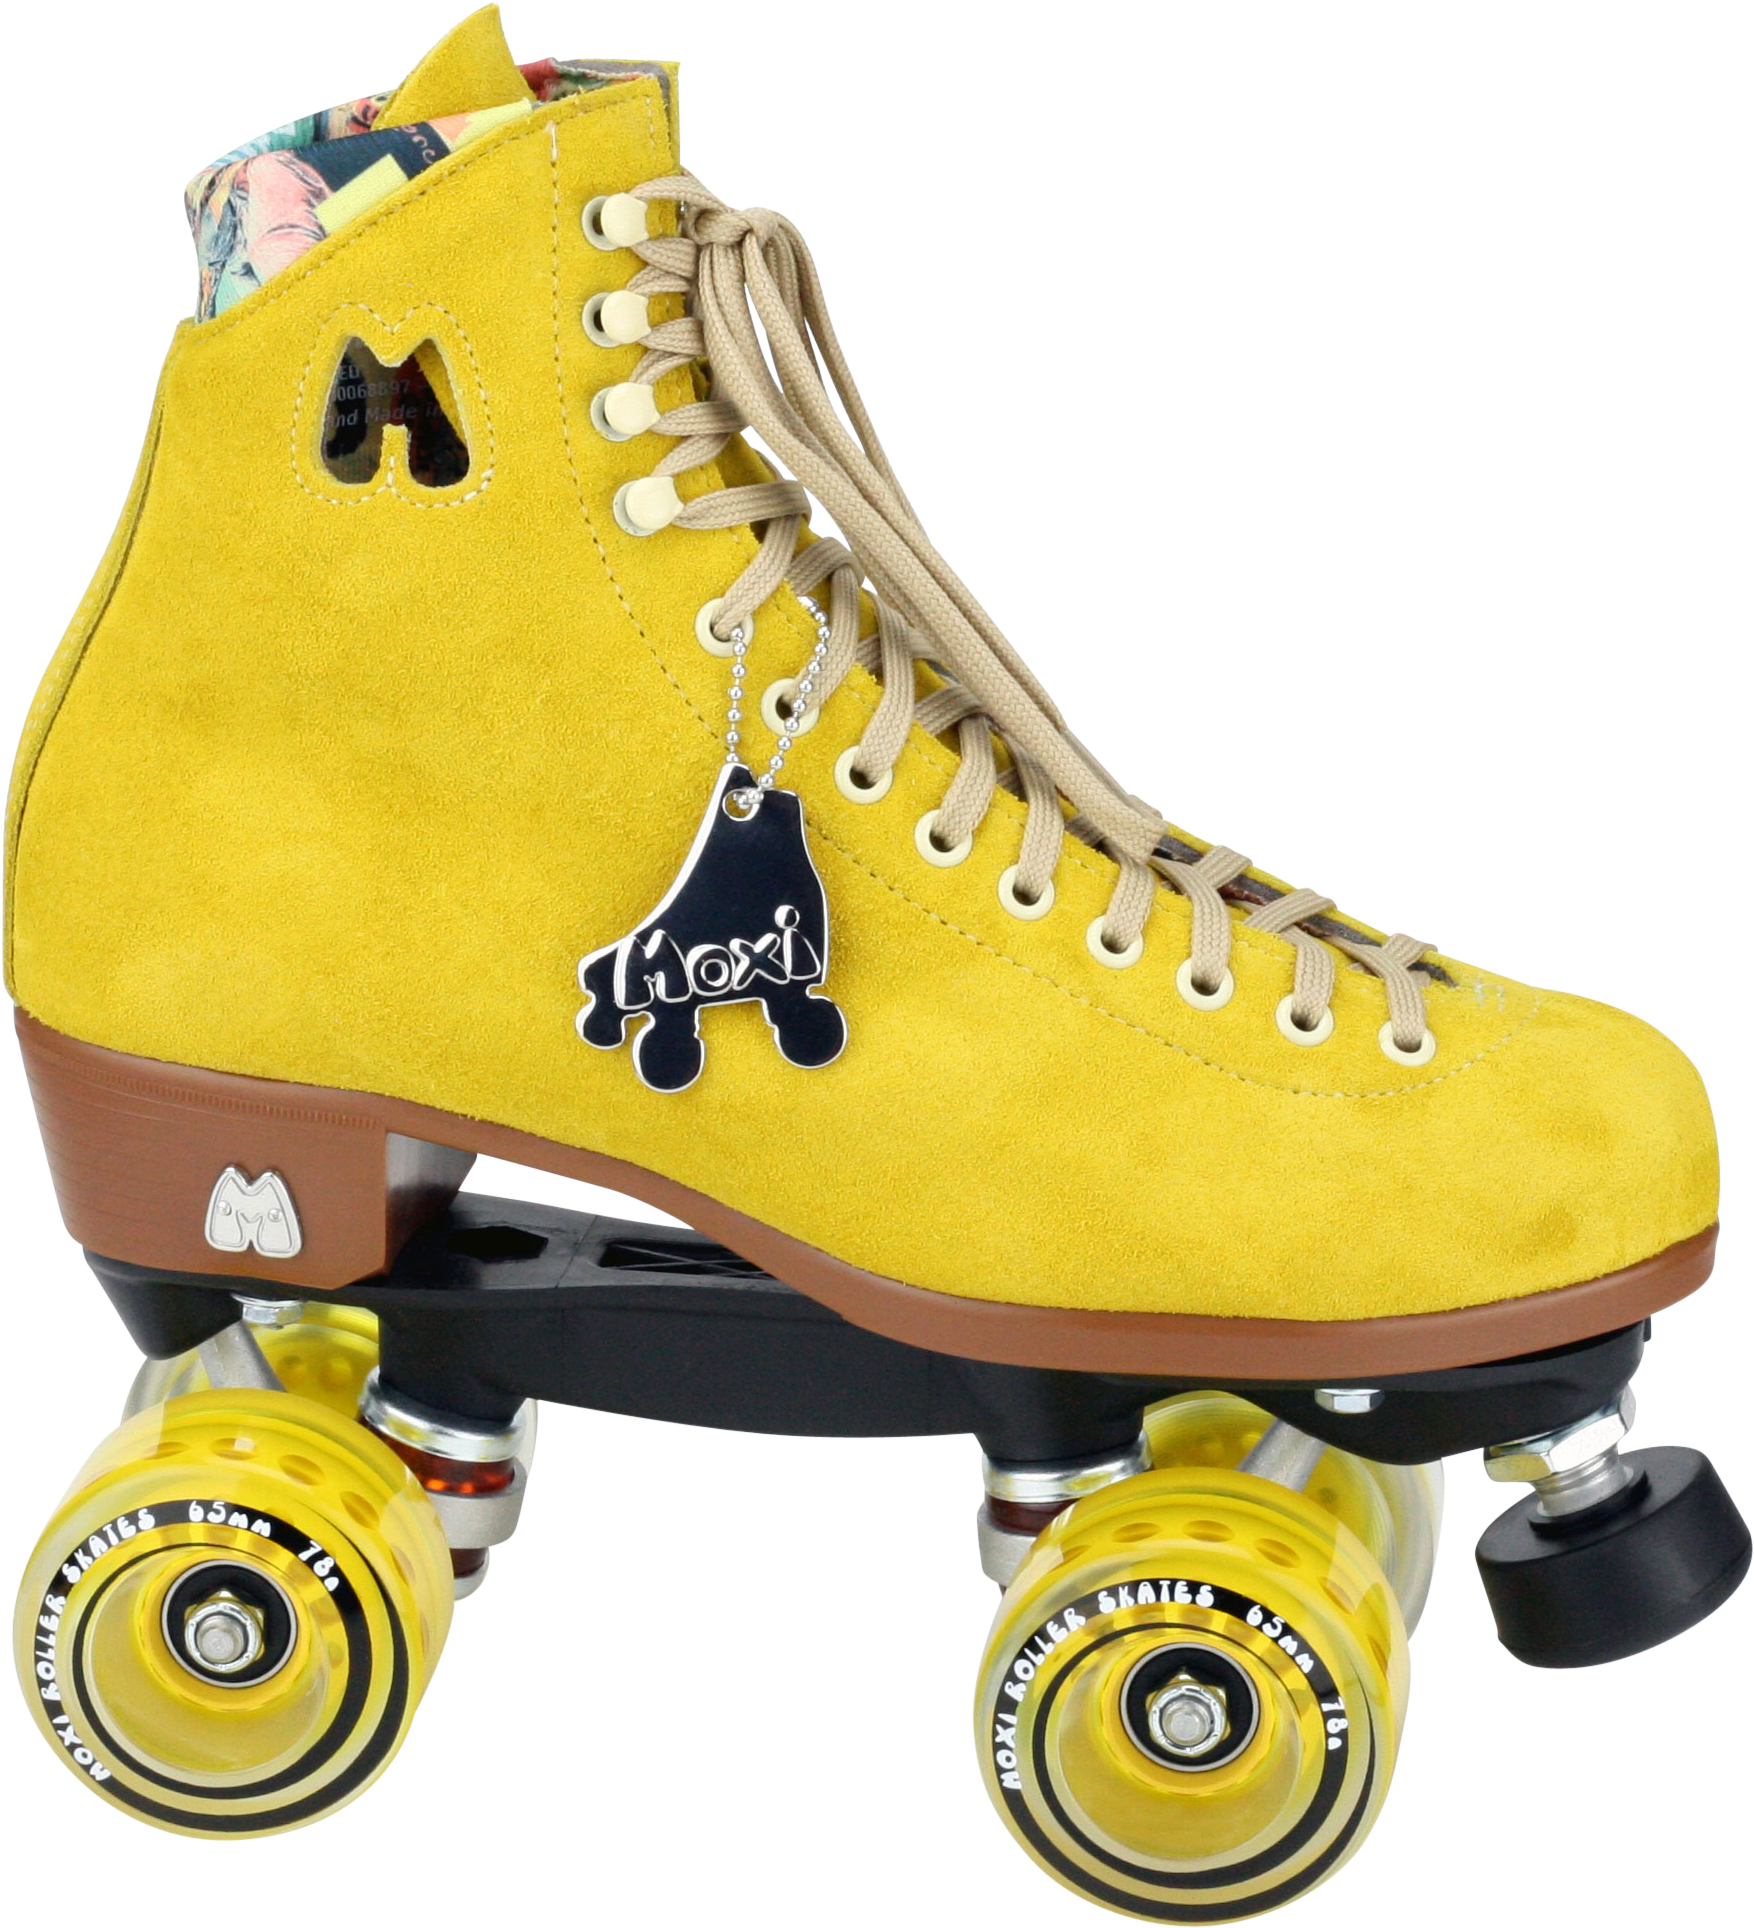 A Yellow Roller Skate With A Tag